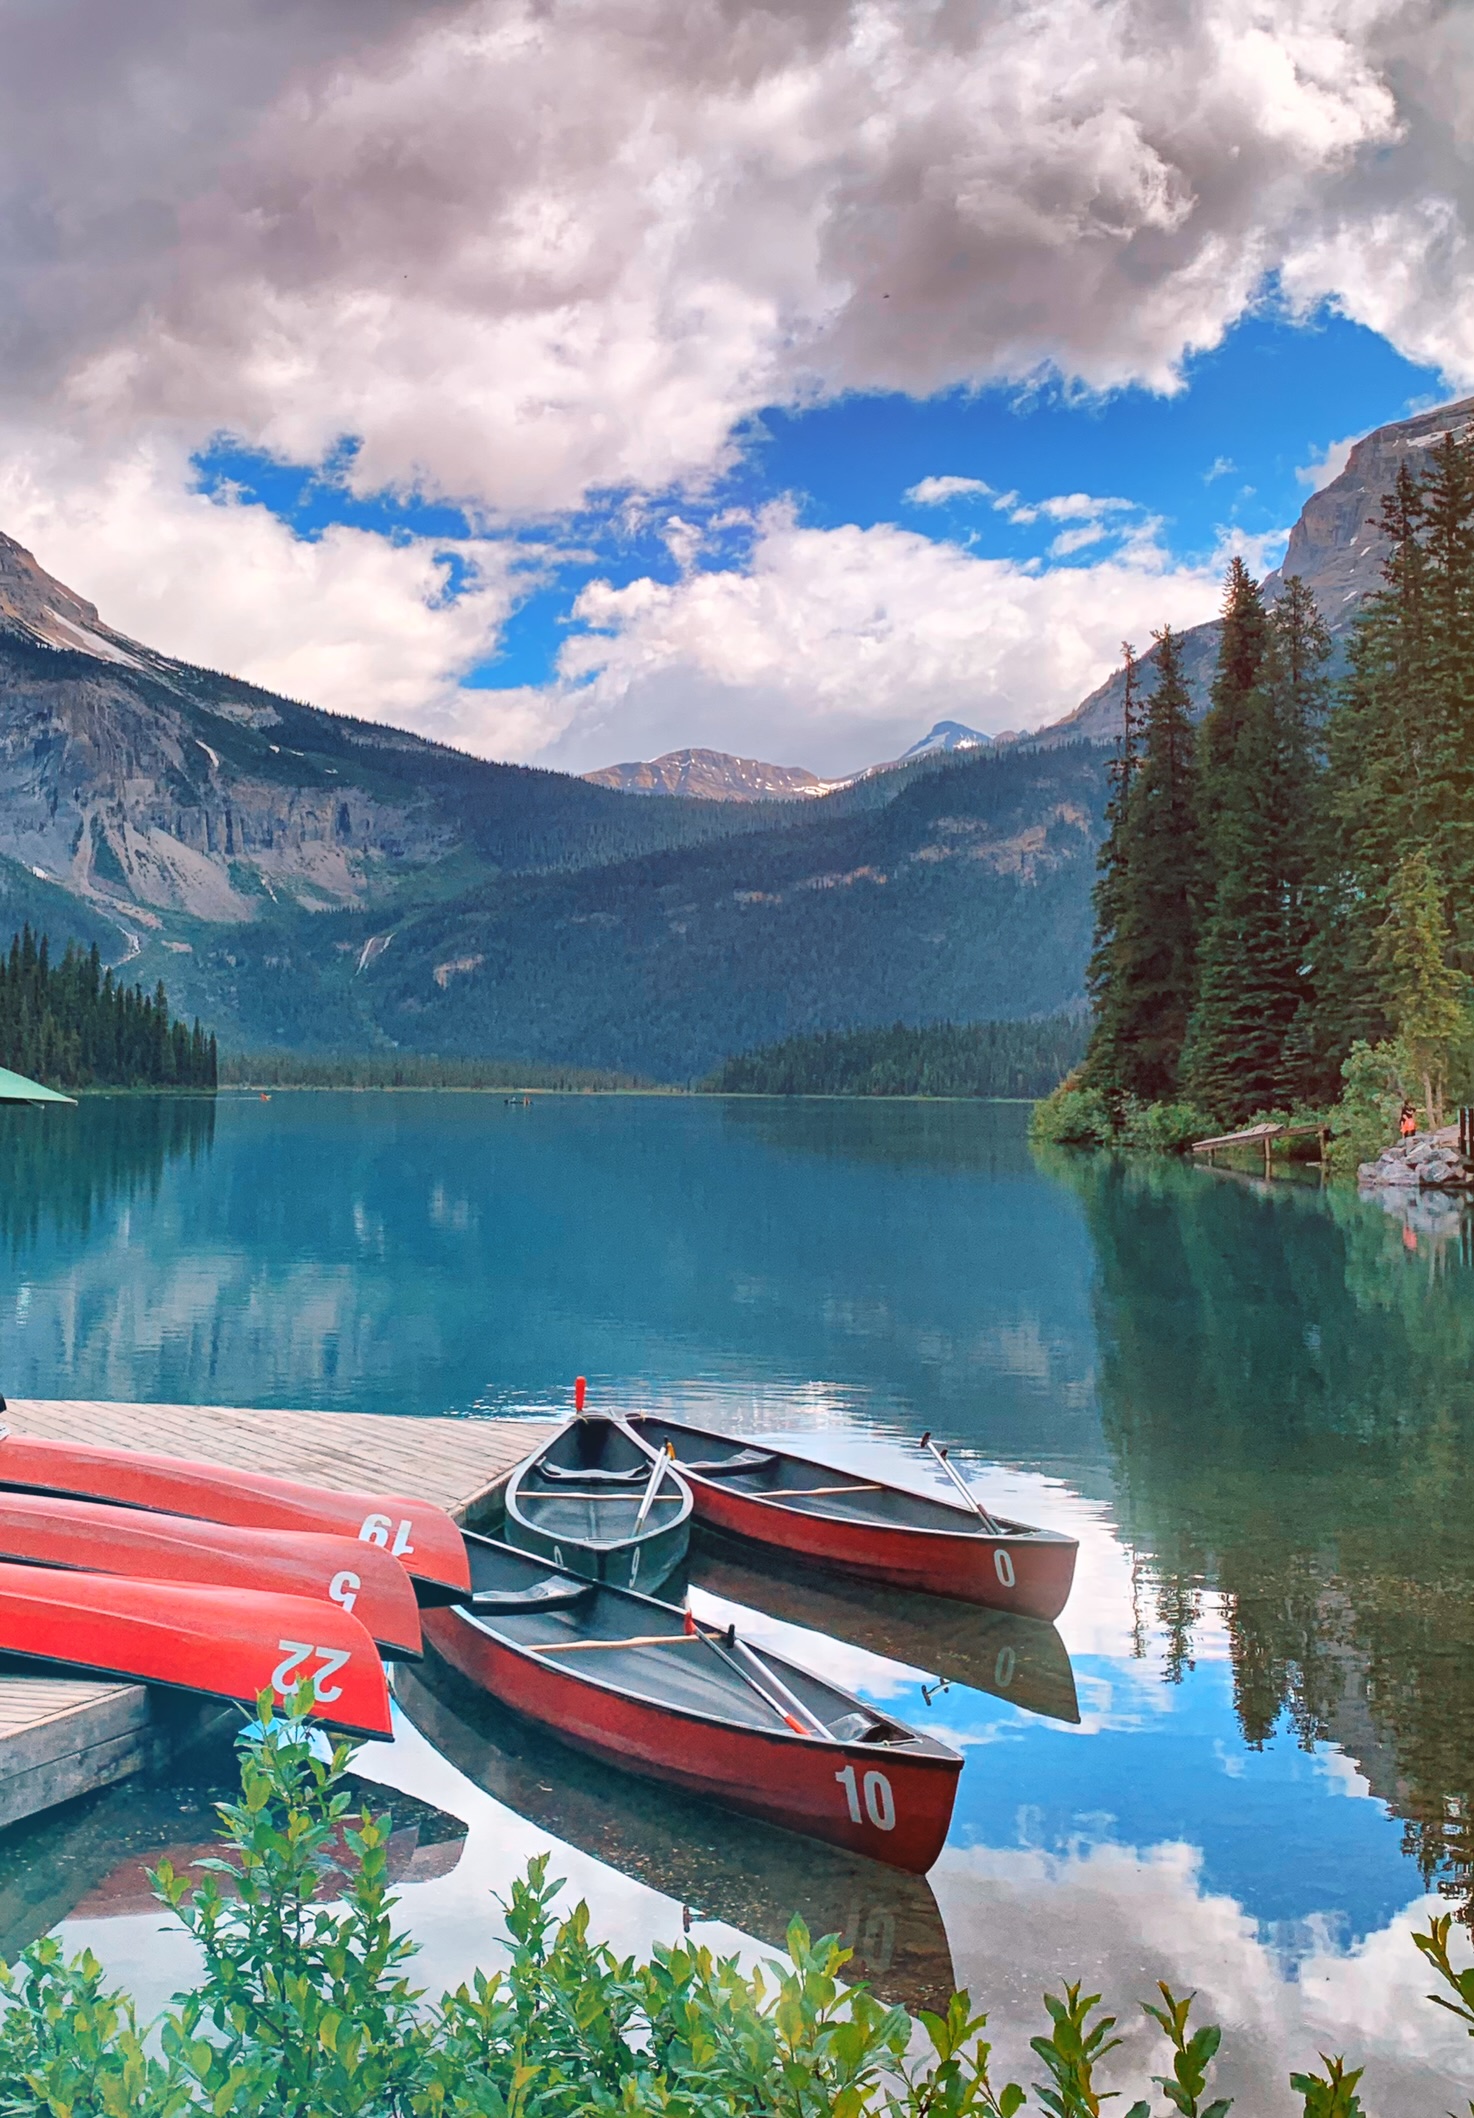 Canoeing at Emerald Lake - Things to do in Banff Canada